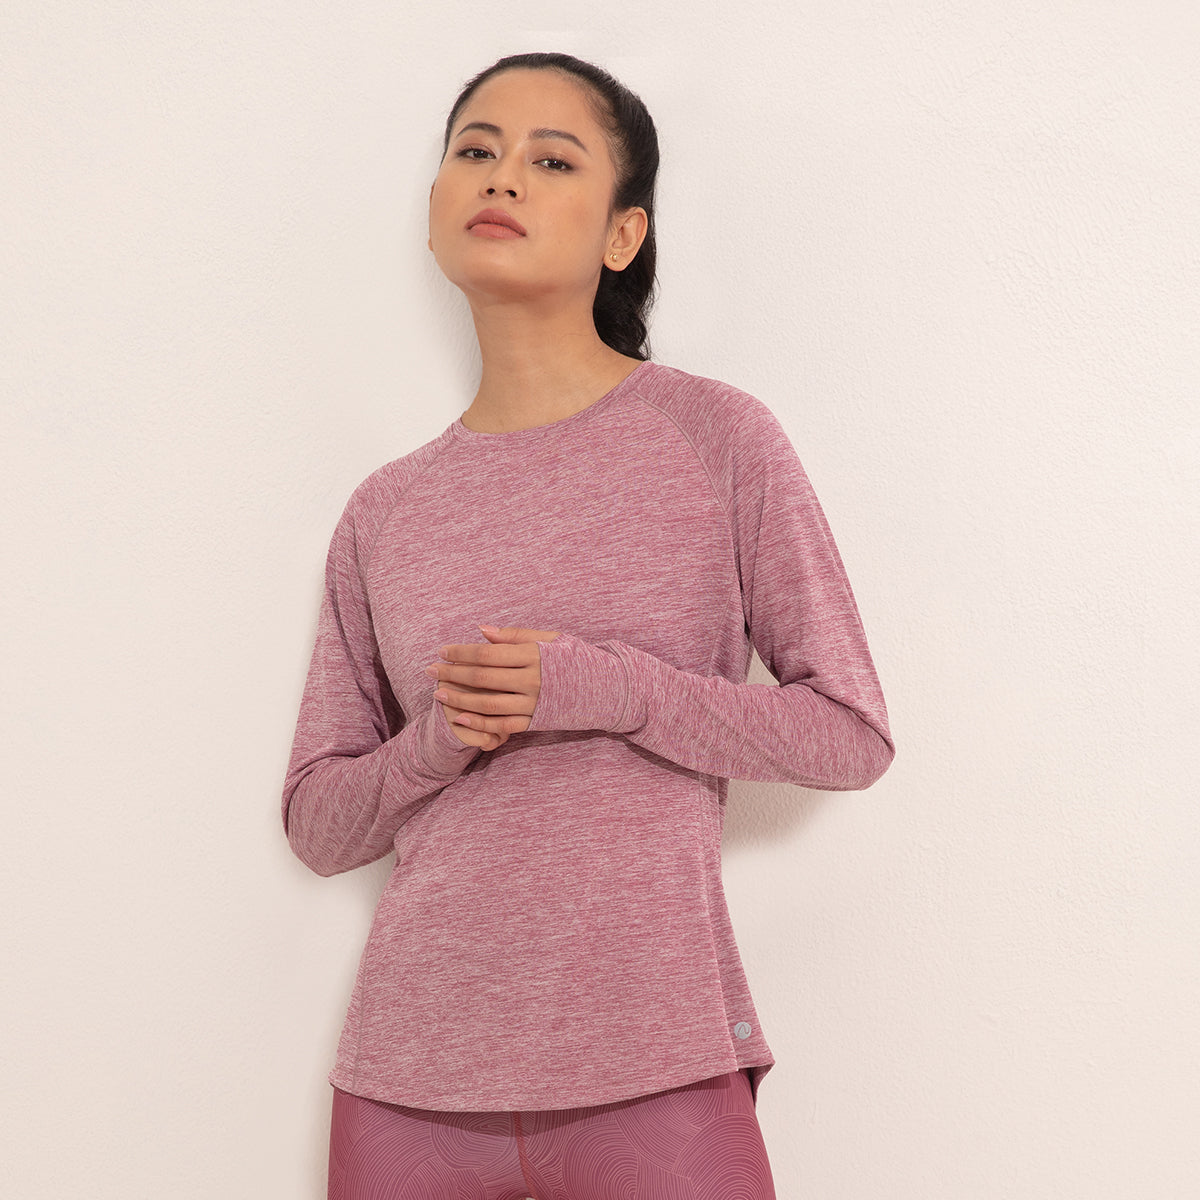 Long Sleeved Athletic Top-NYK311 Wistful Mauve